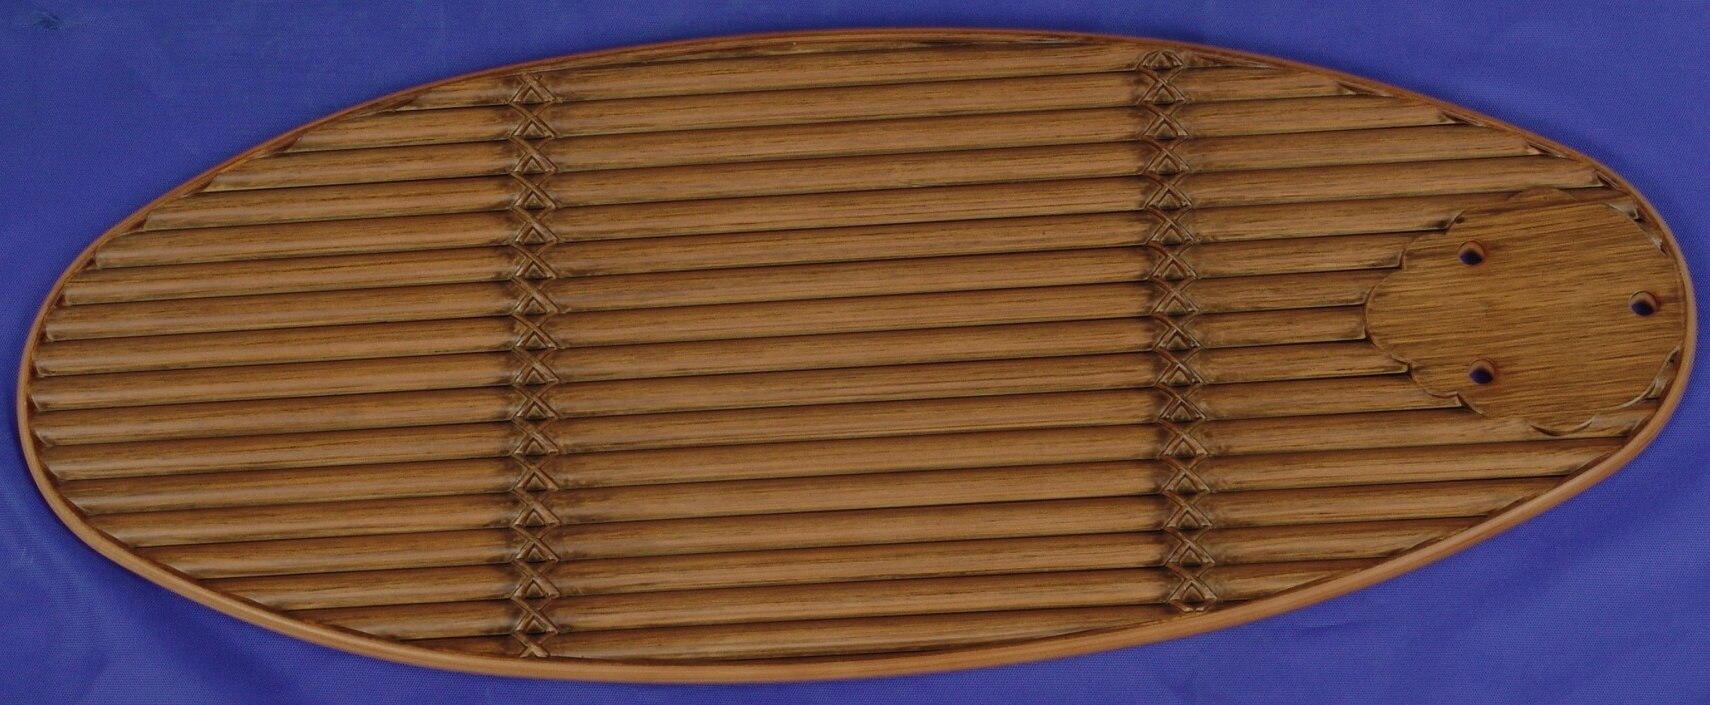 (Discontinued) Bamboo Fan Blades